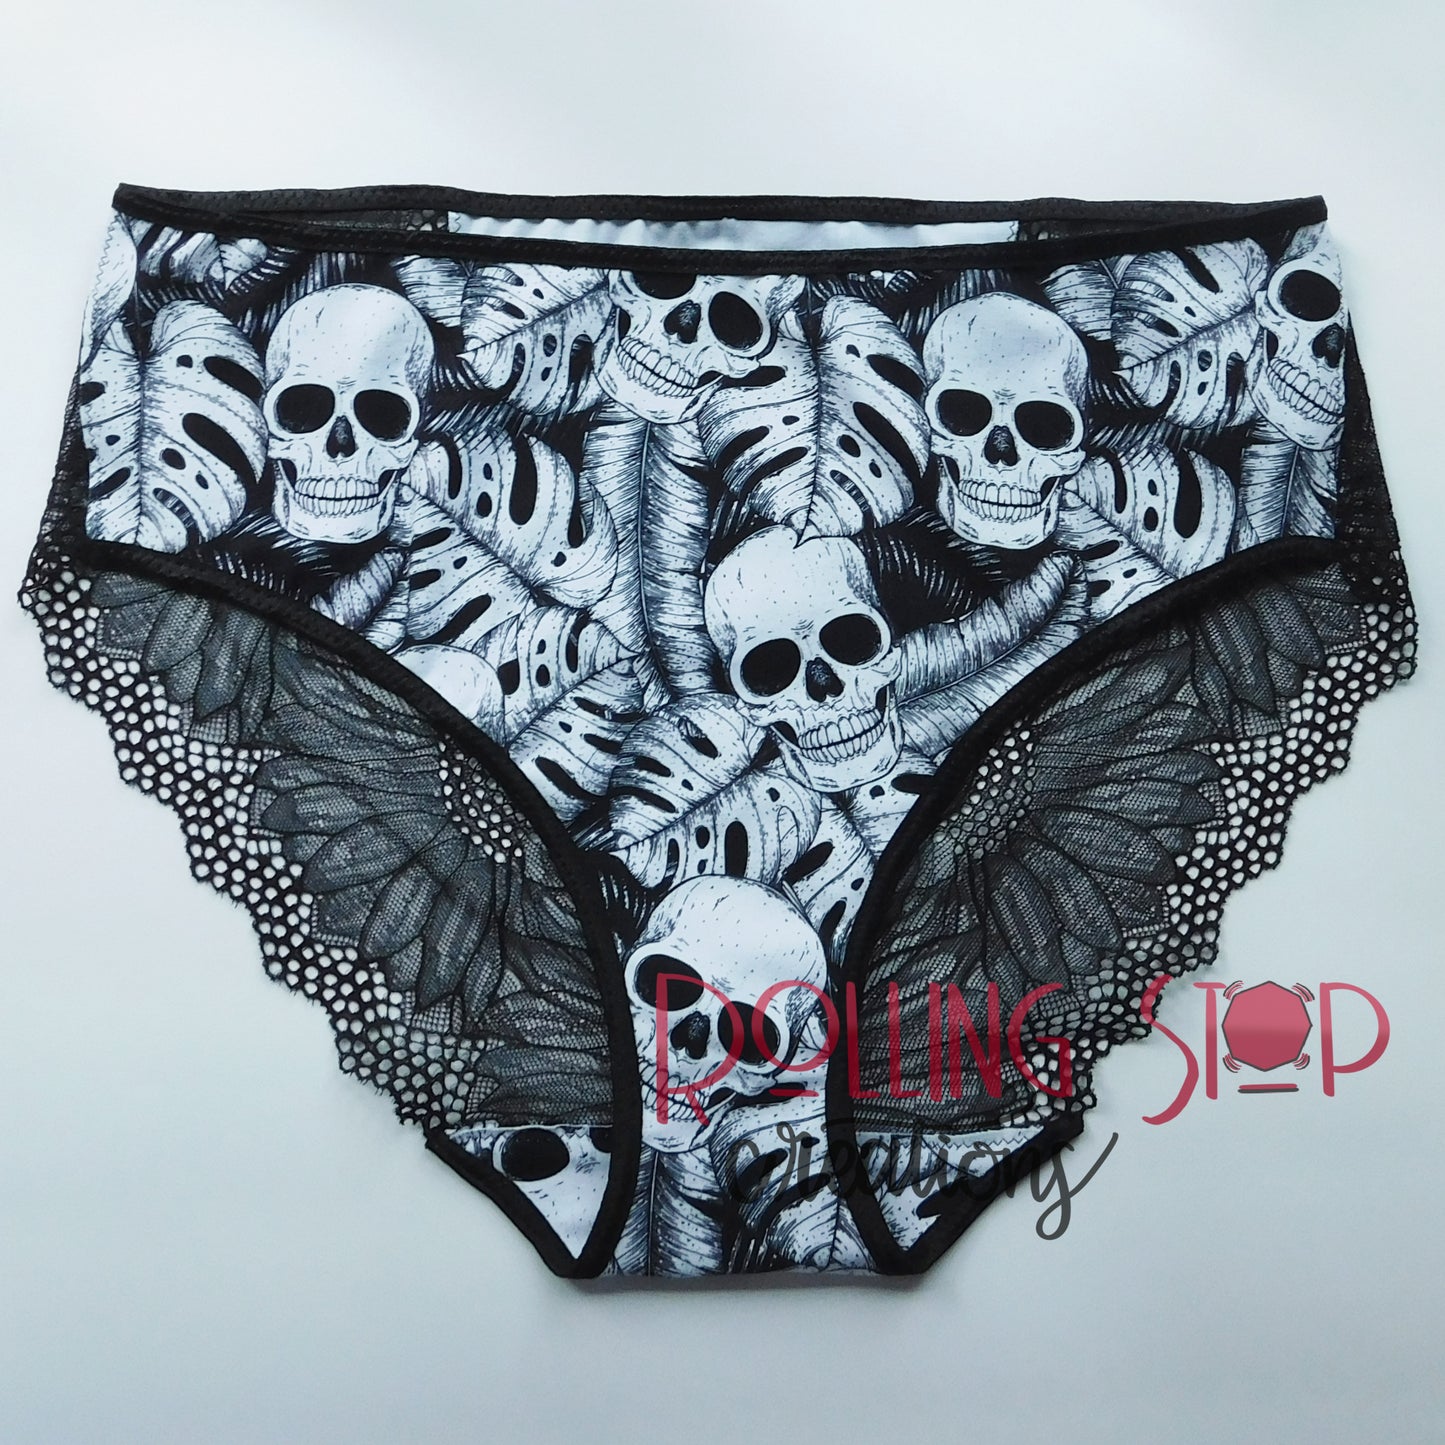 Rainbow Powder Monstera Skulls Lace Accent Pantydrawls by Rolling Stop Creations sold by Rolling Stop Creations 